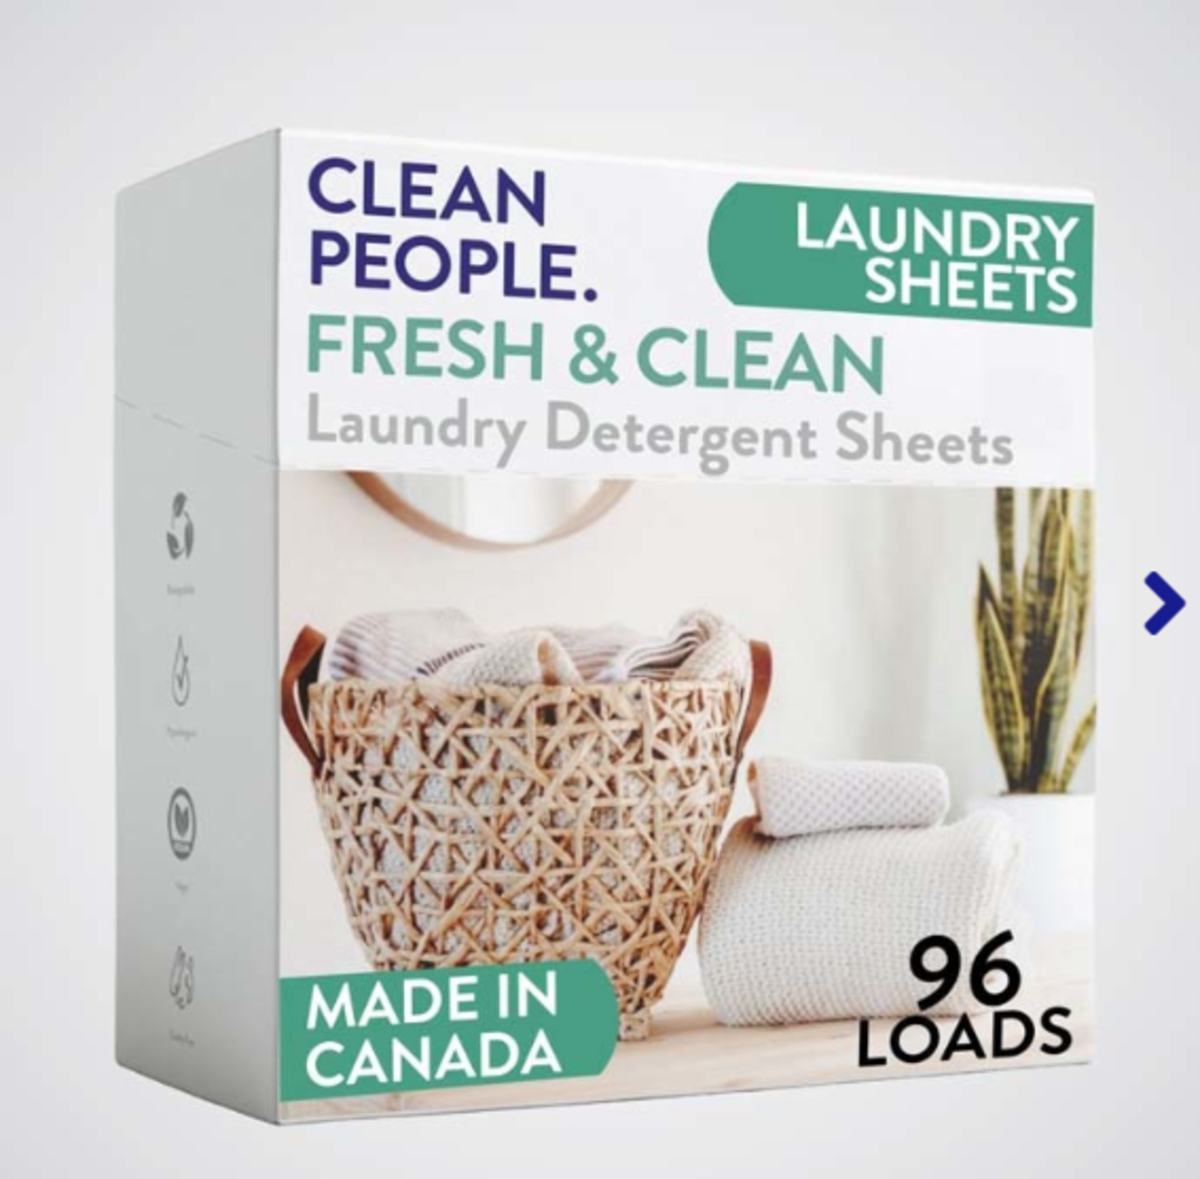 Review: Clean People Laundry Detergent Sheets